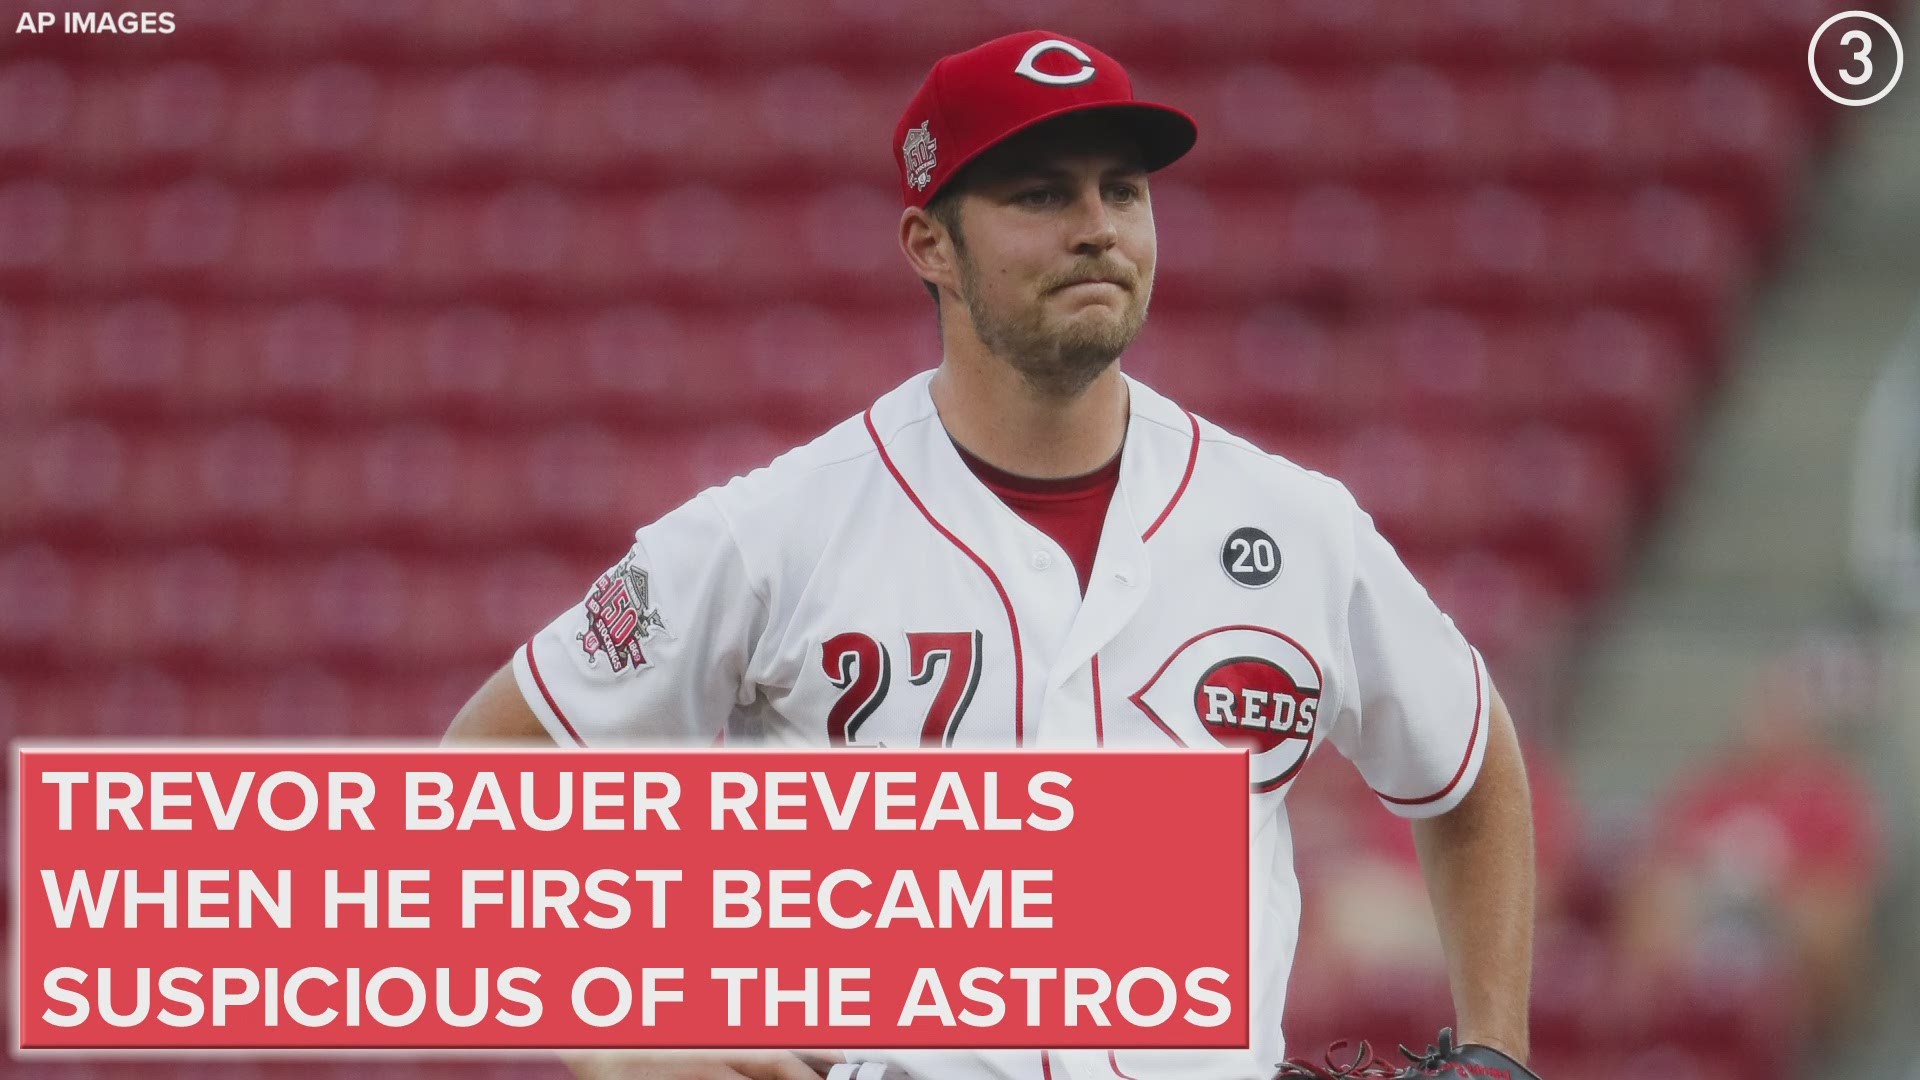 During an appearance on the R2C2 podcast, former Cleveland Indians pitcher Trevor Bauer discussed when he first became aware of the Houston Astros' sign-stealing.